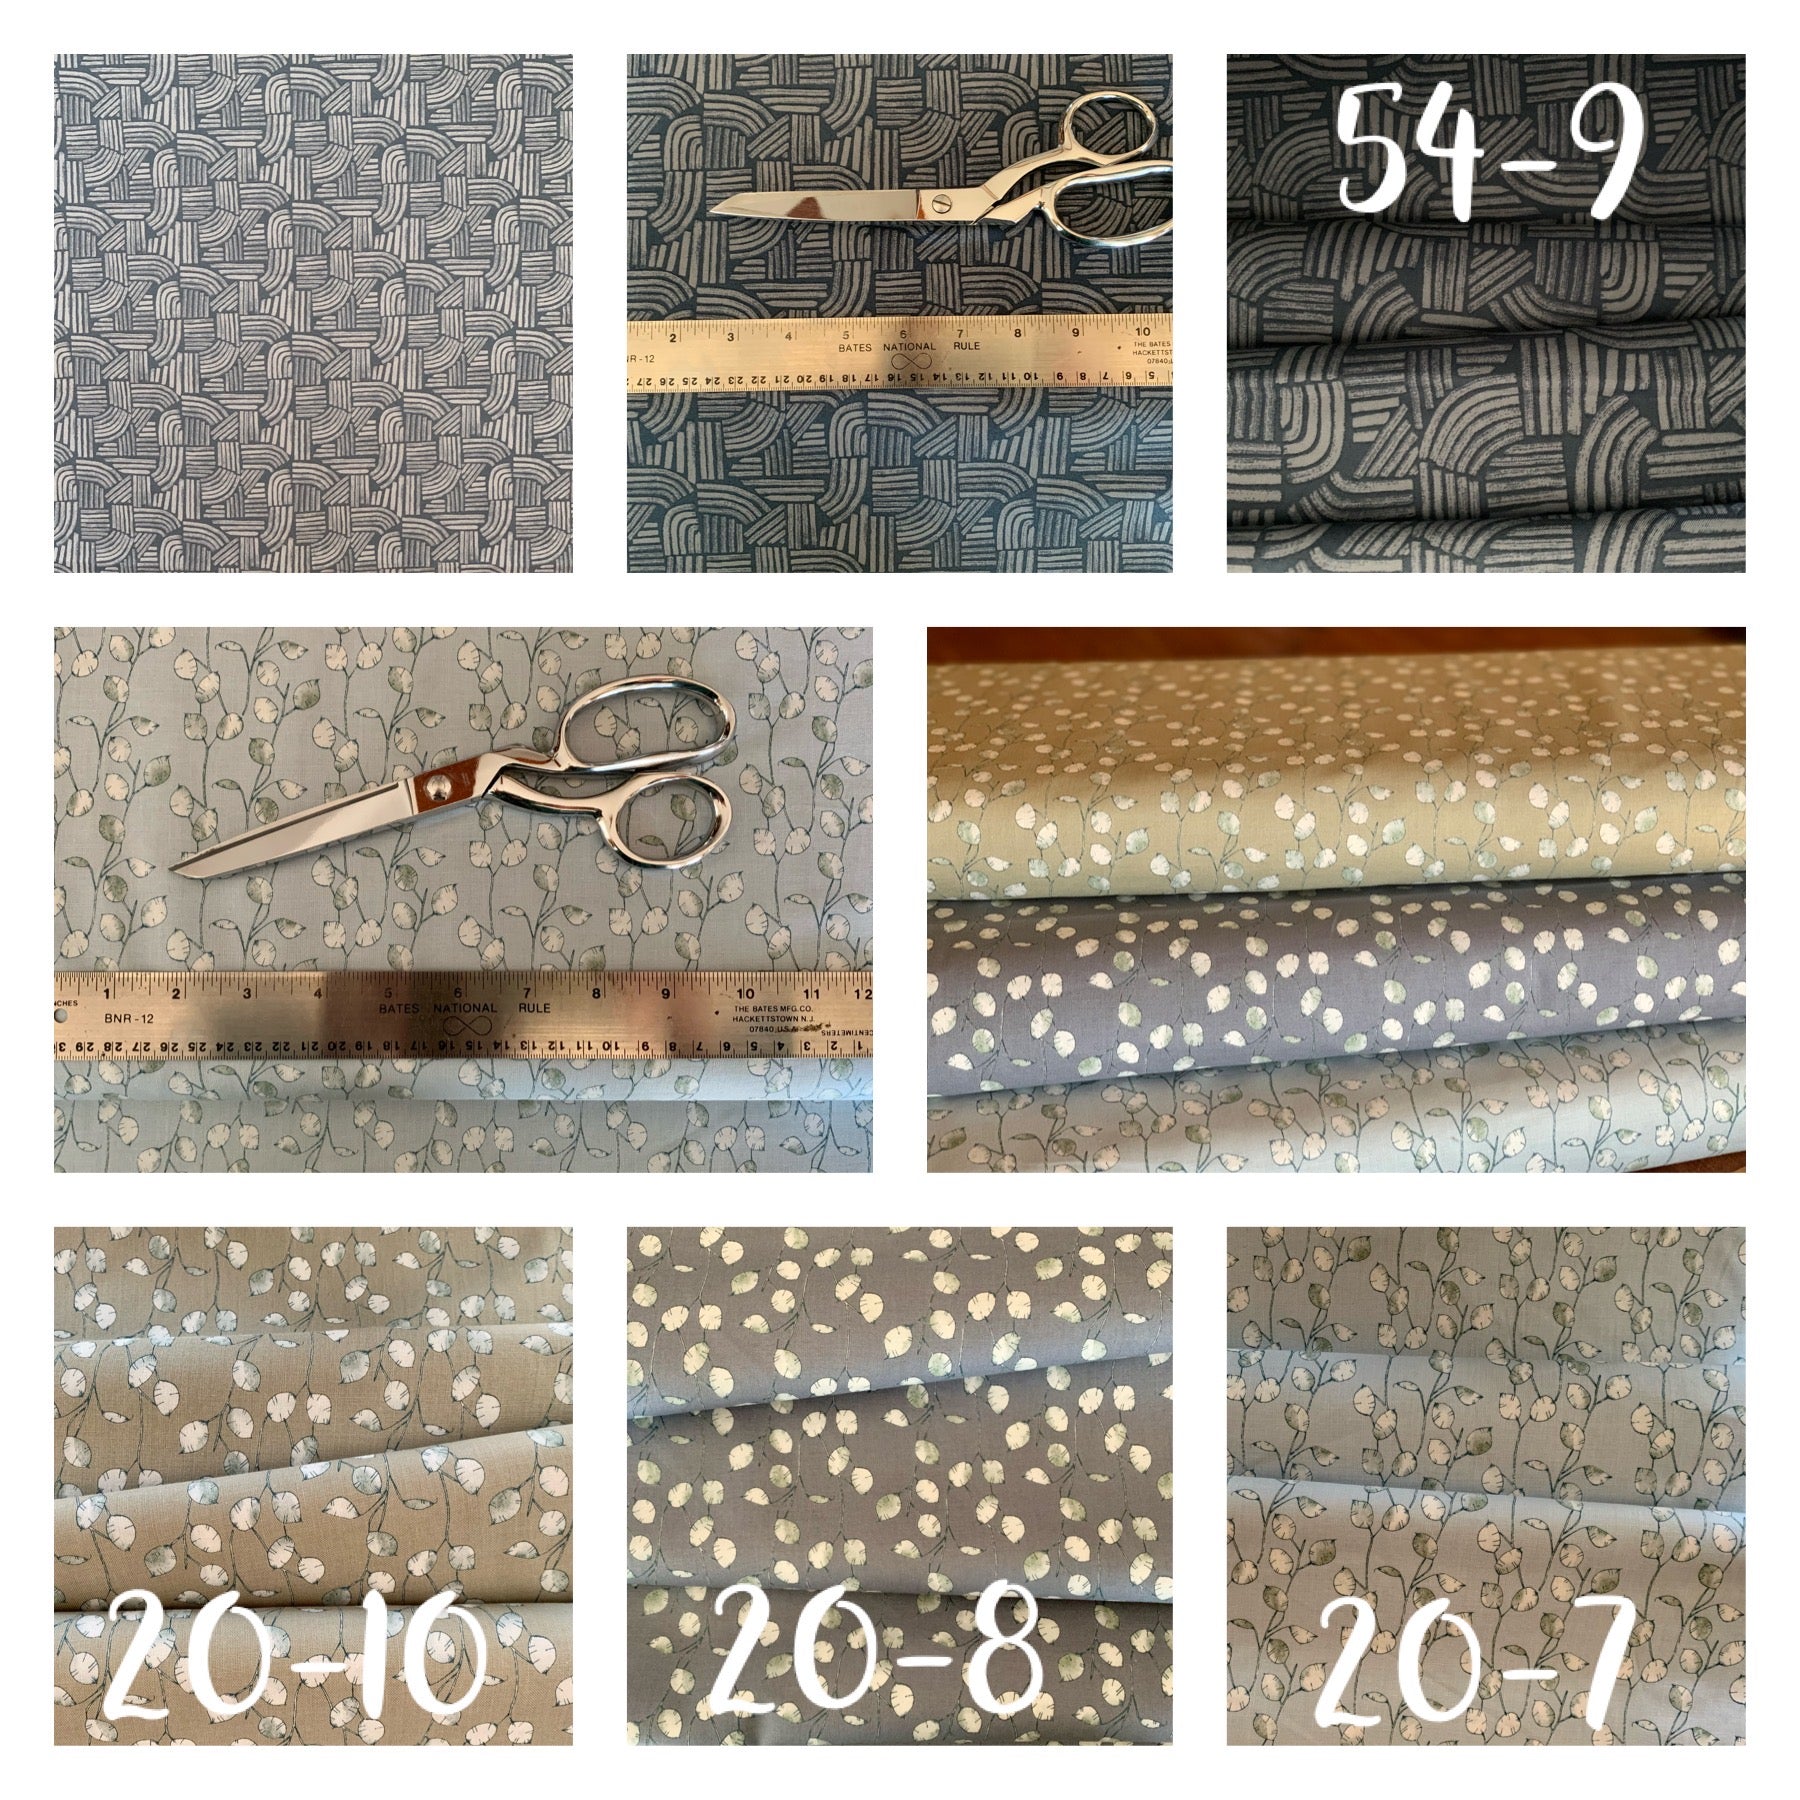 Coordinating Fabric Collections—Mix & Match Patterns